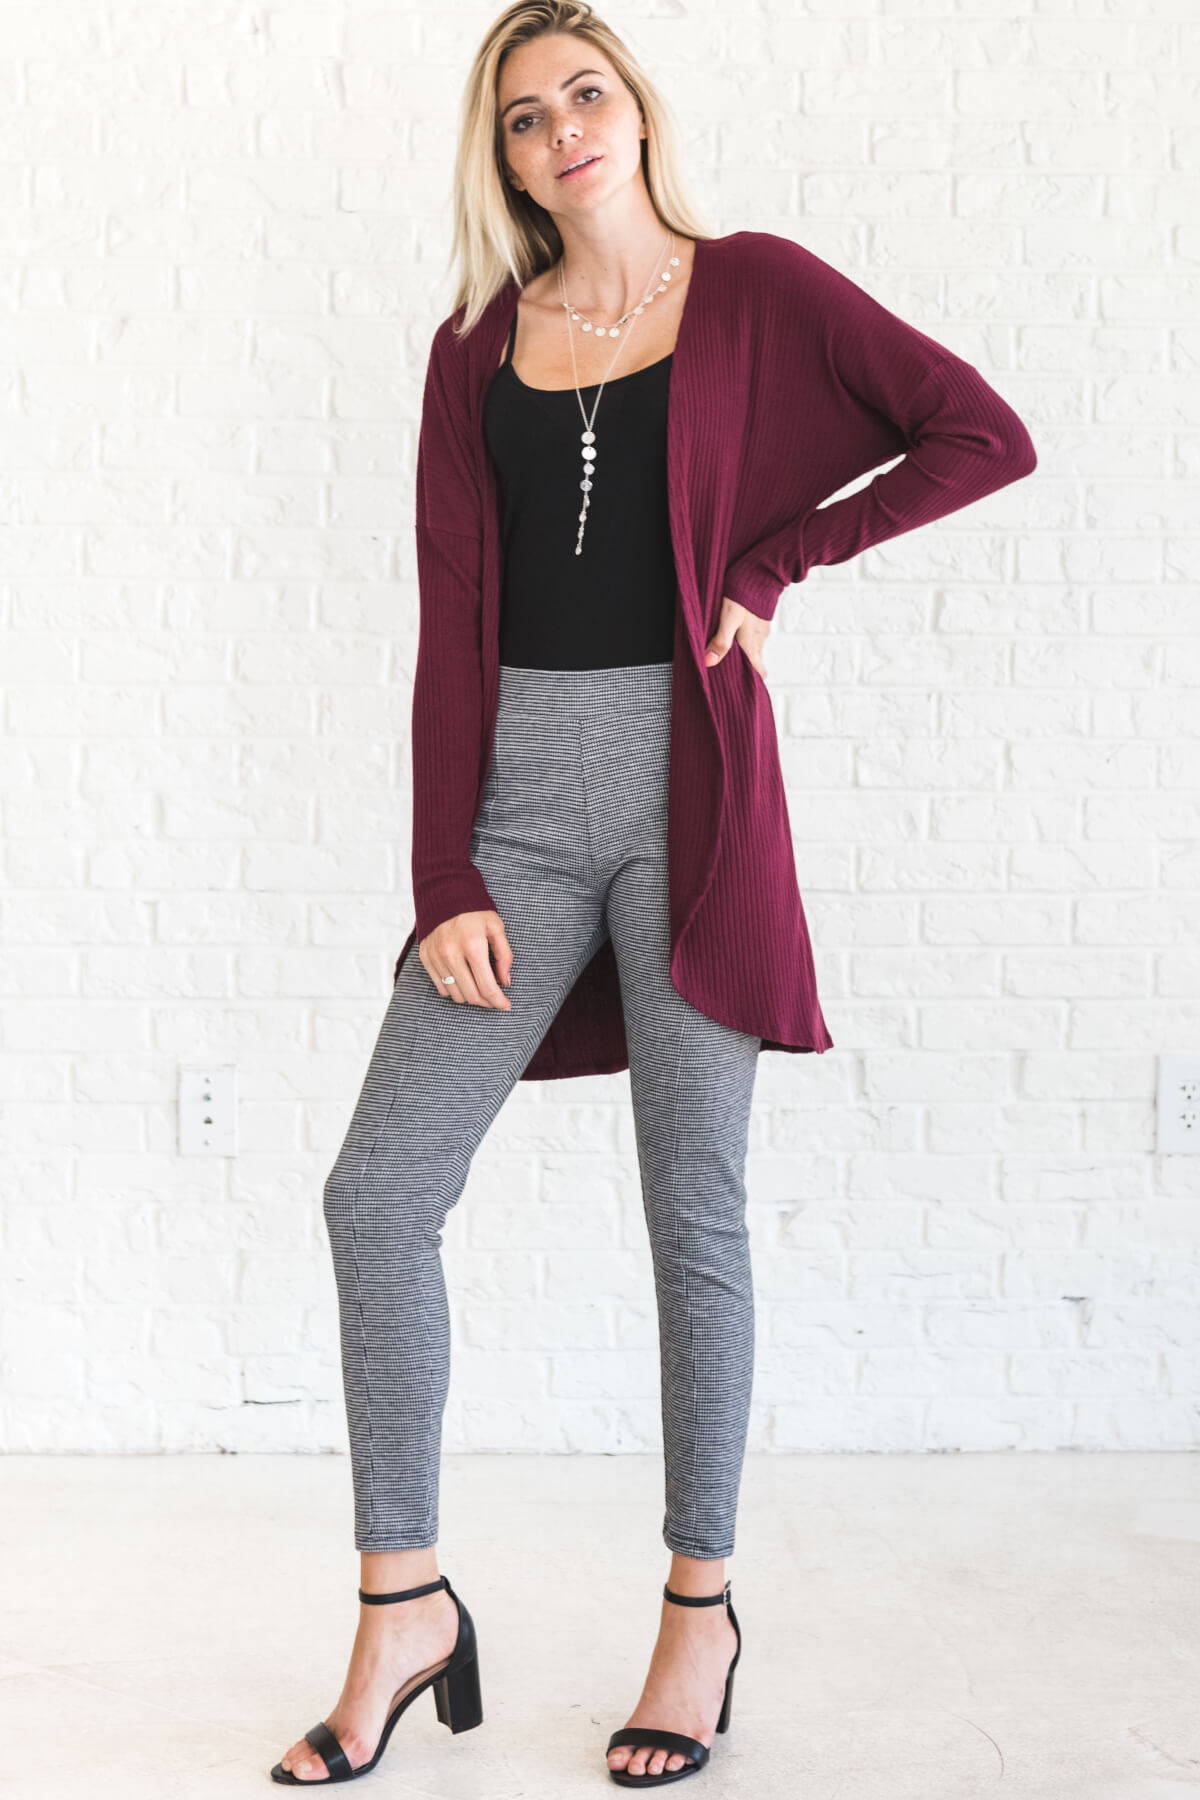 business casual women's clothing stores